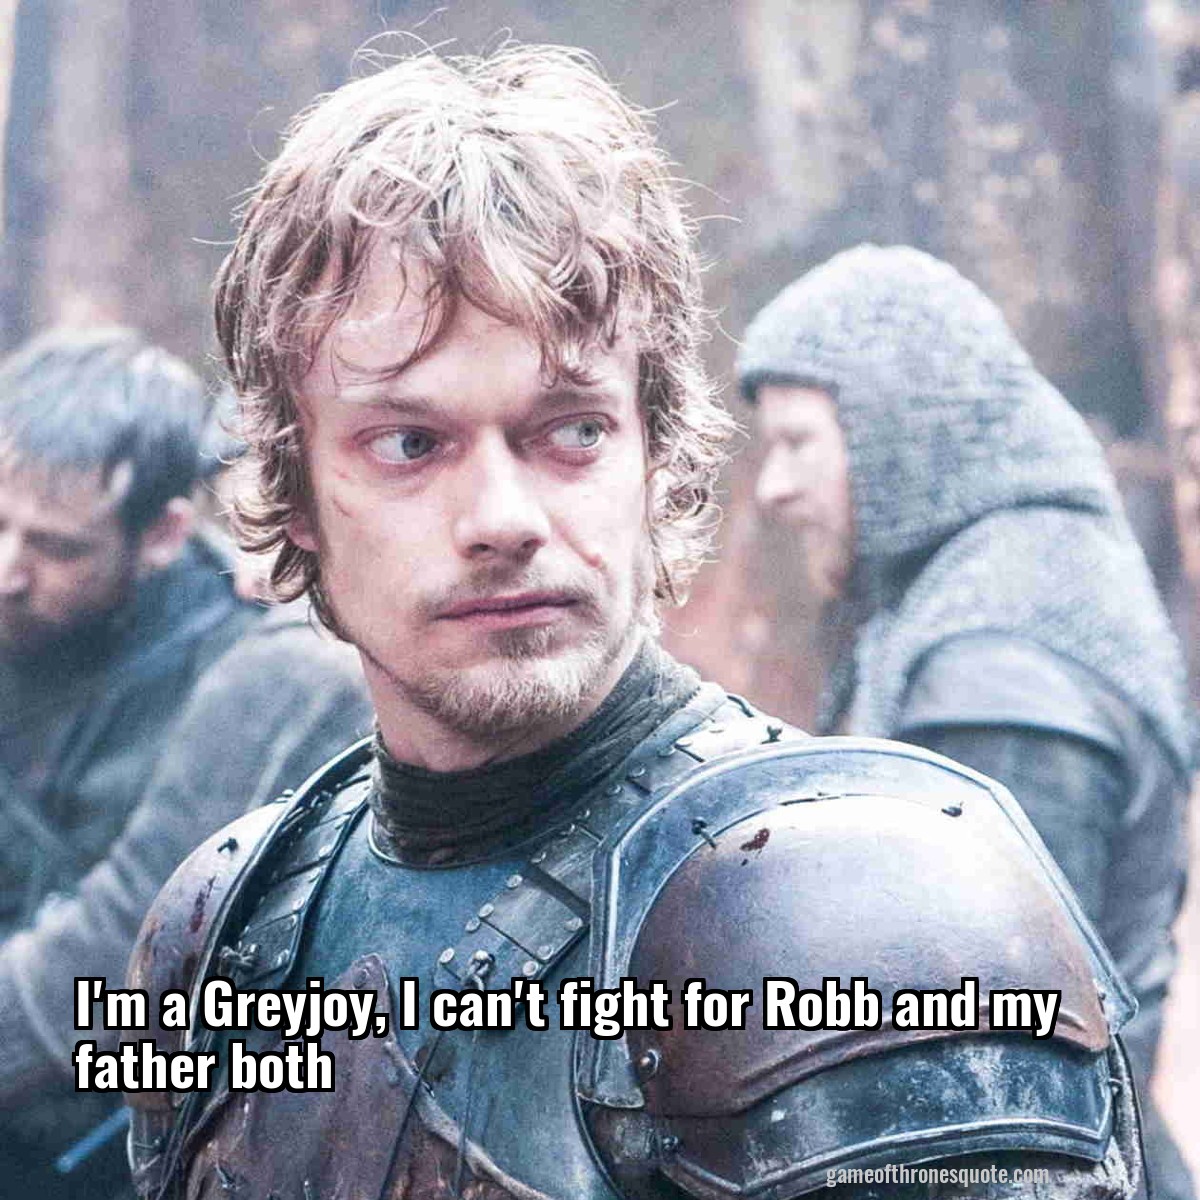 I'm a Greyjoy, I can't fight for Robb and my father both